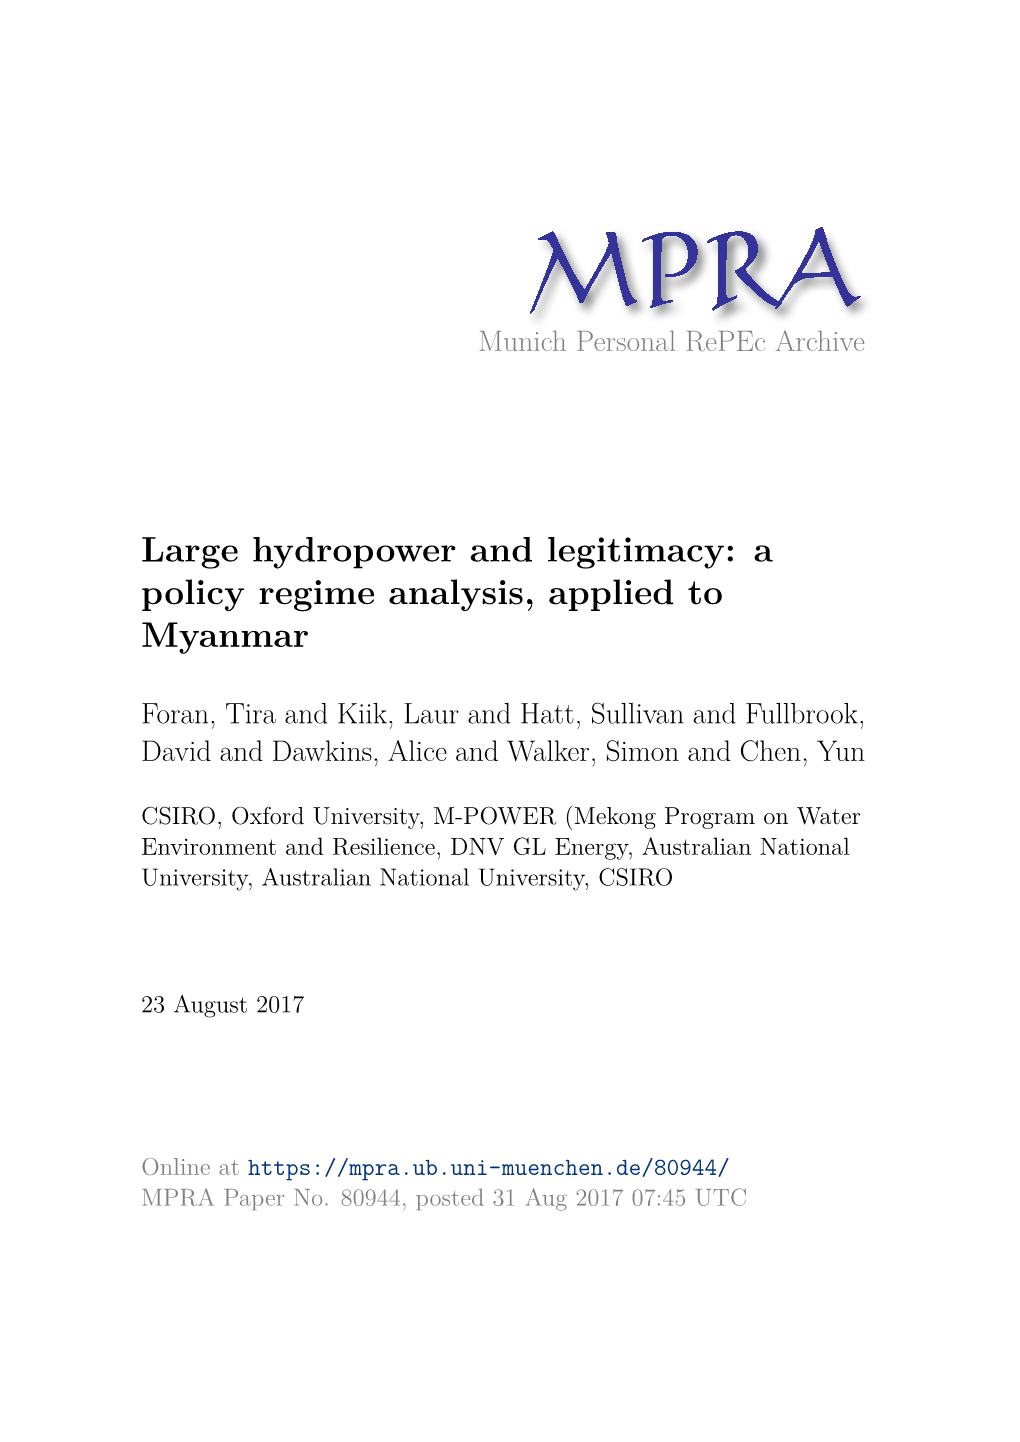 Large Hydropower and Legitimacy: a Policy Regime Analysis, Applied to Myanmar